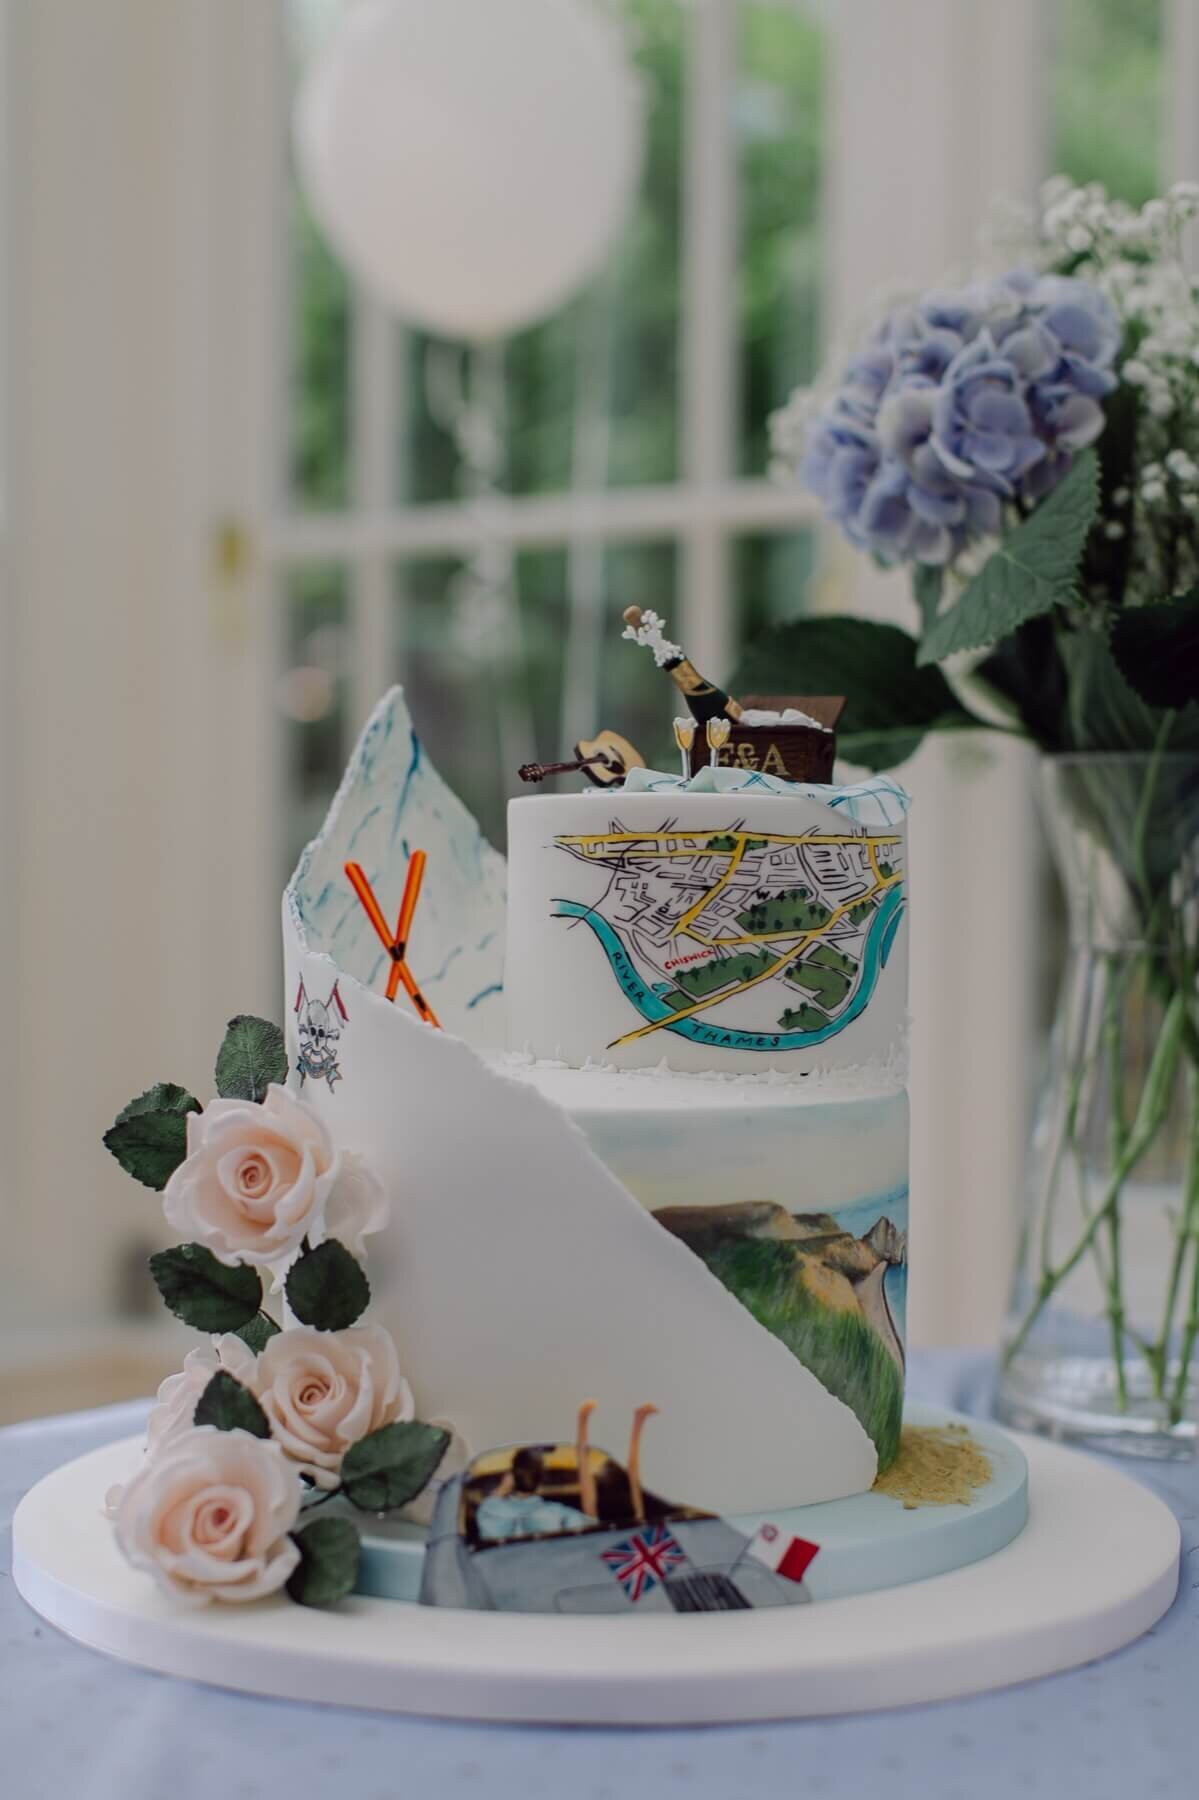 A unique wedding cake with 2 tiers. The cake includes a hand painted map, a chapagne bottle, a guitar and rose sugar flowers